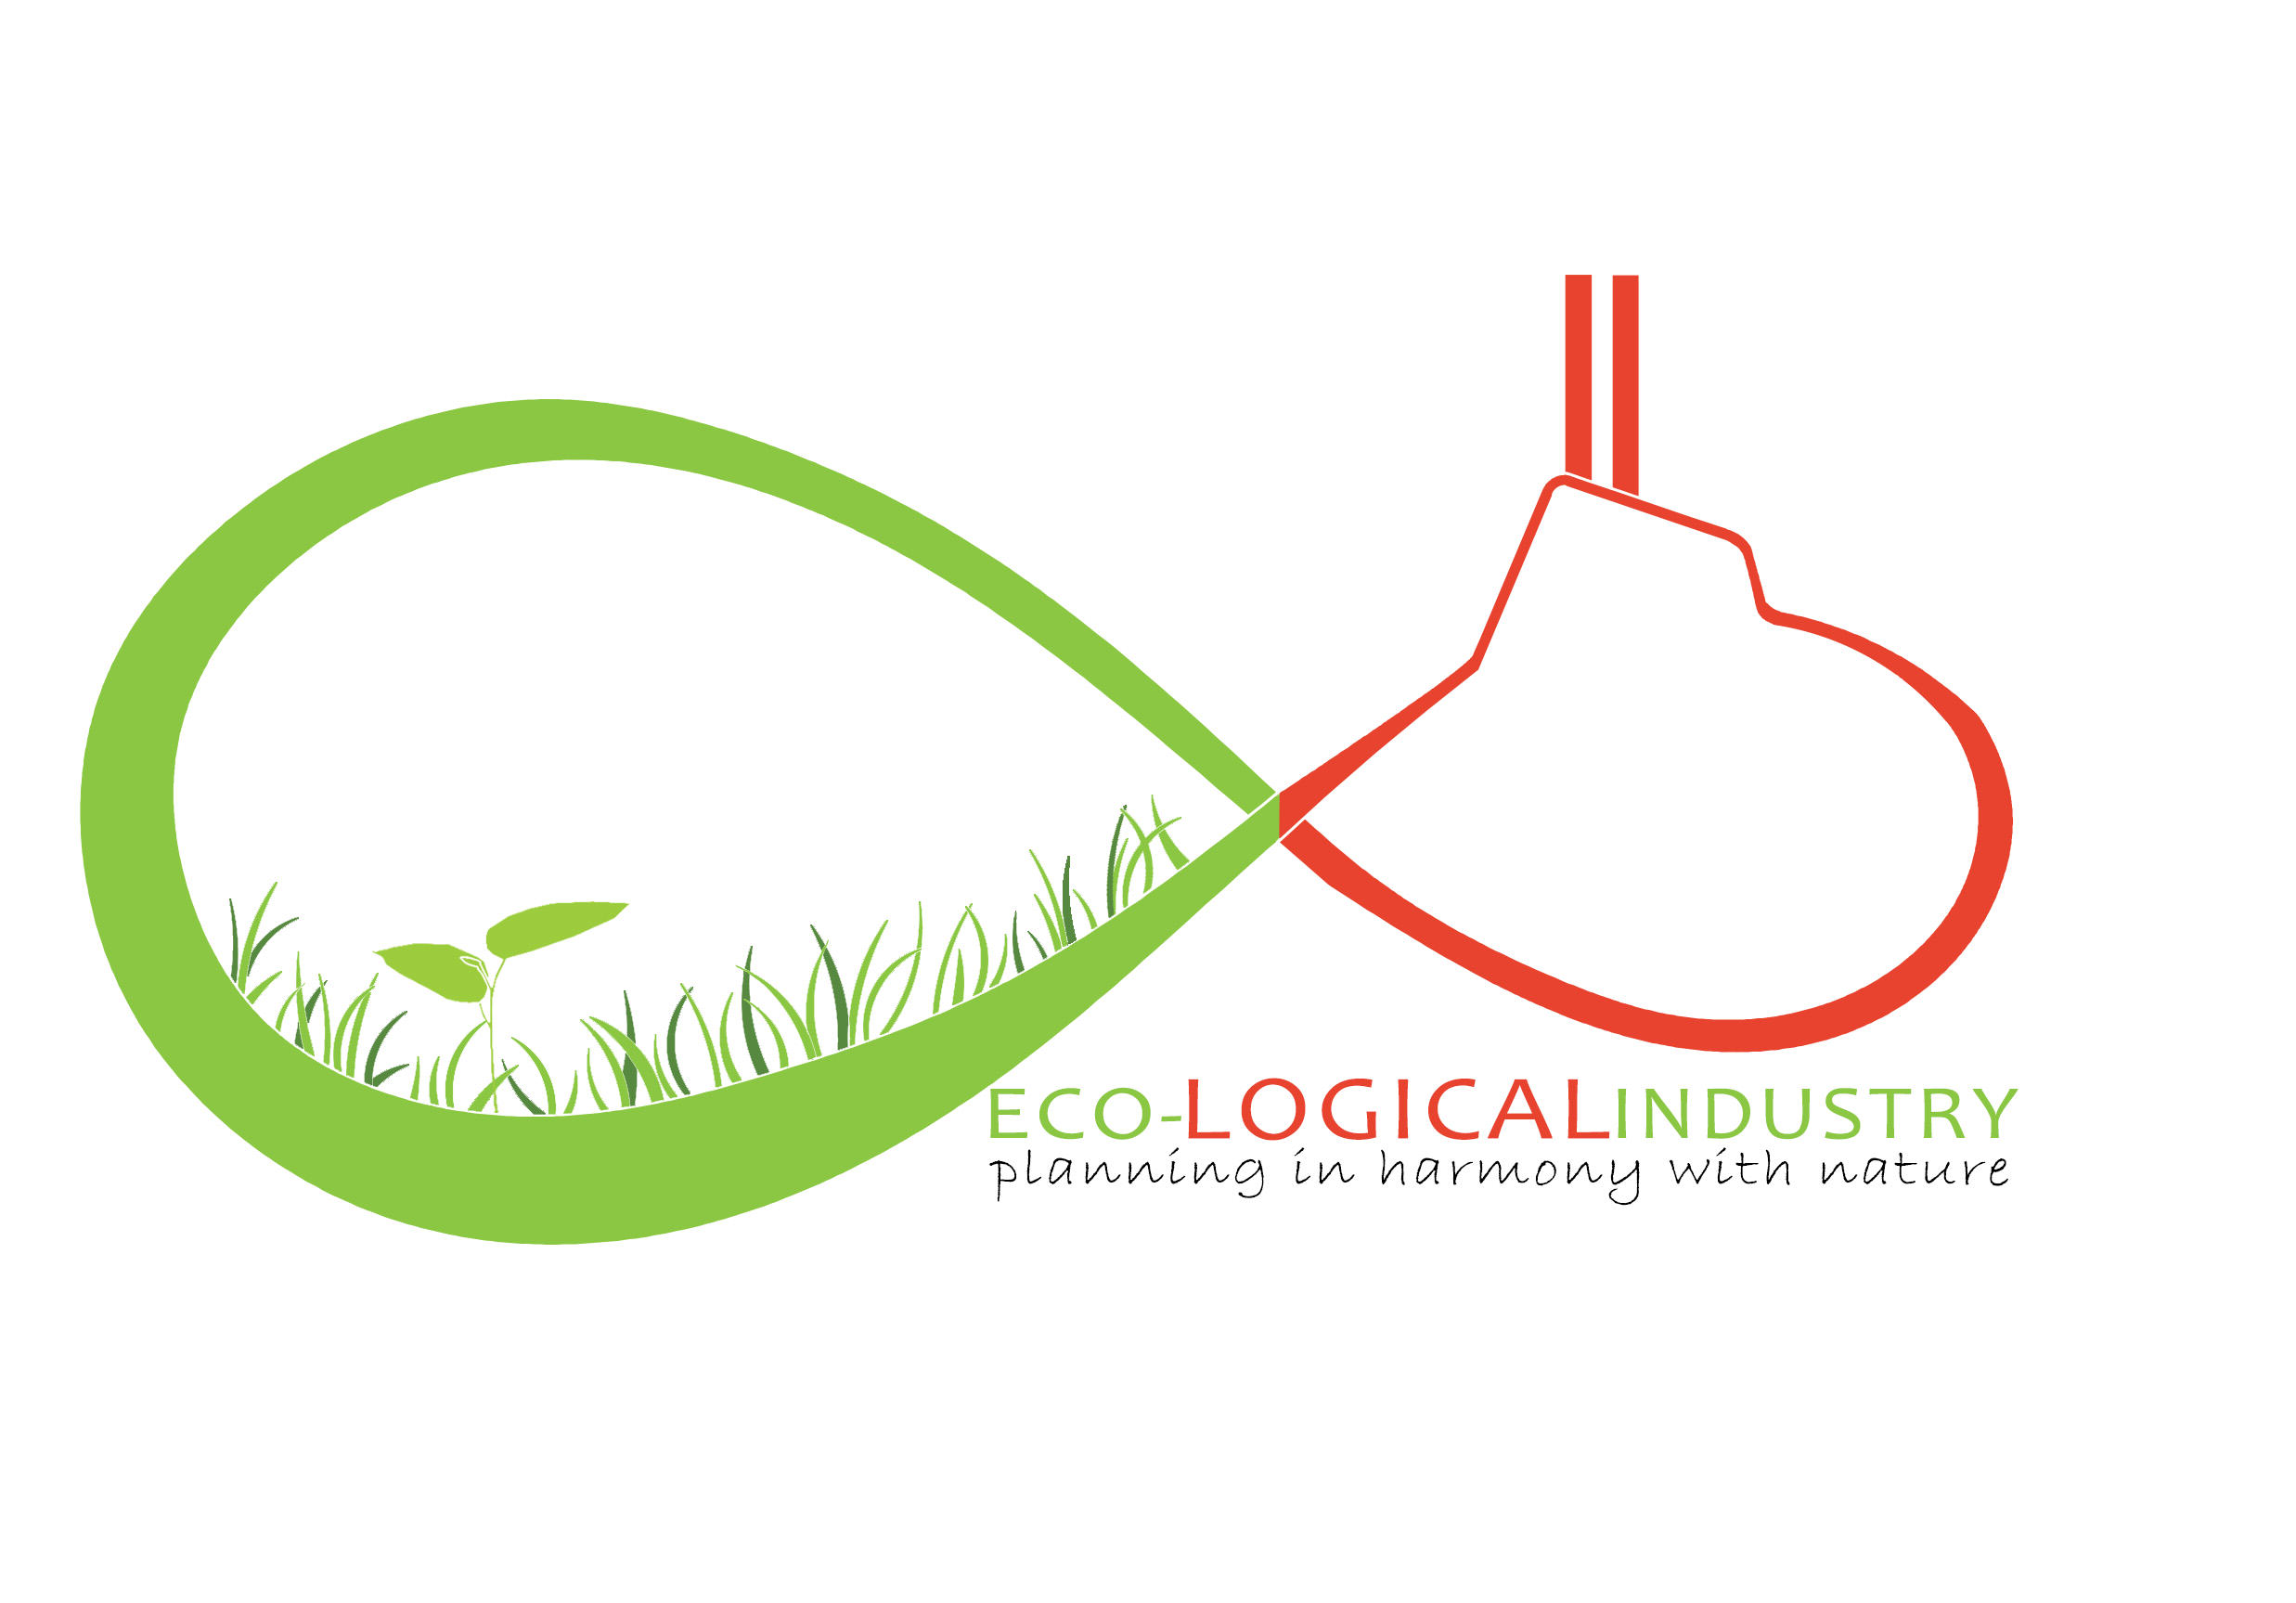 Eco-Logical Industry